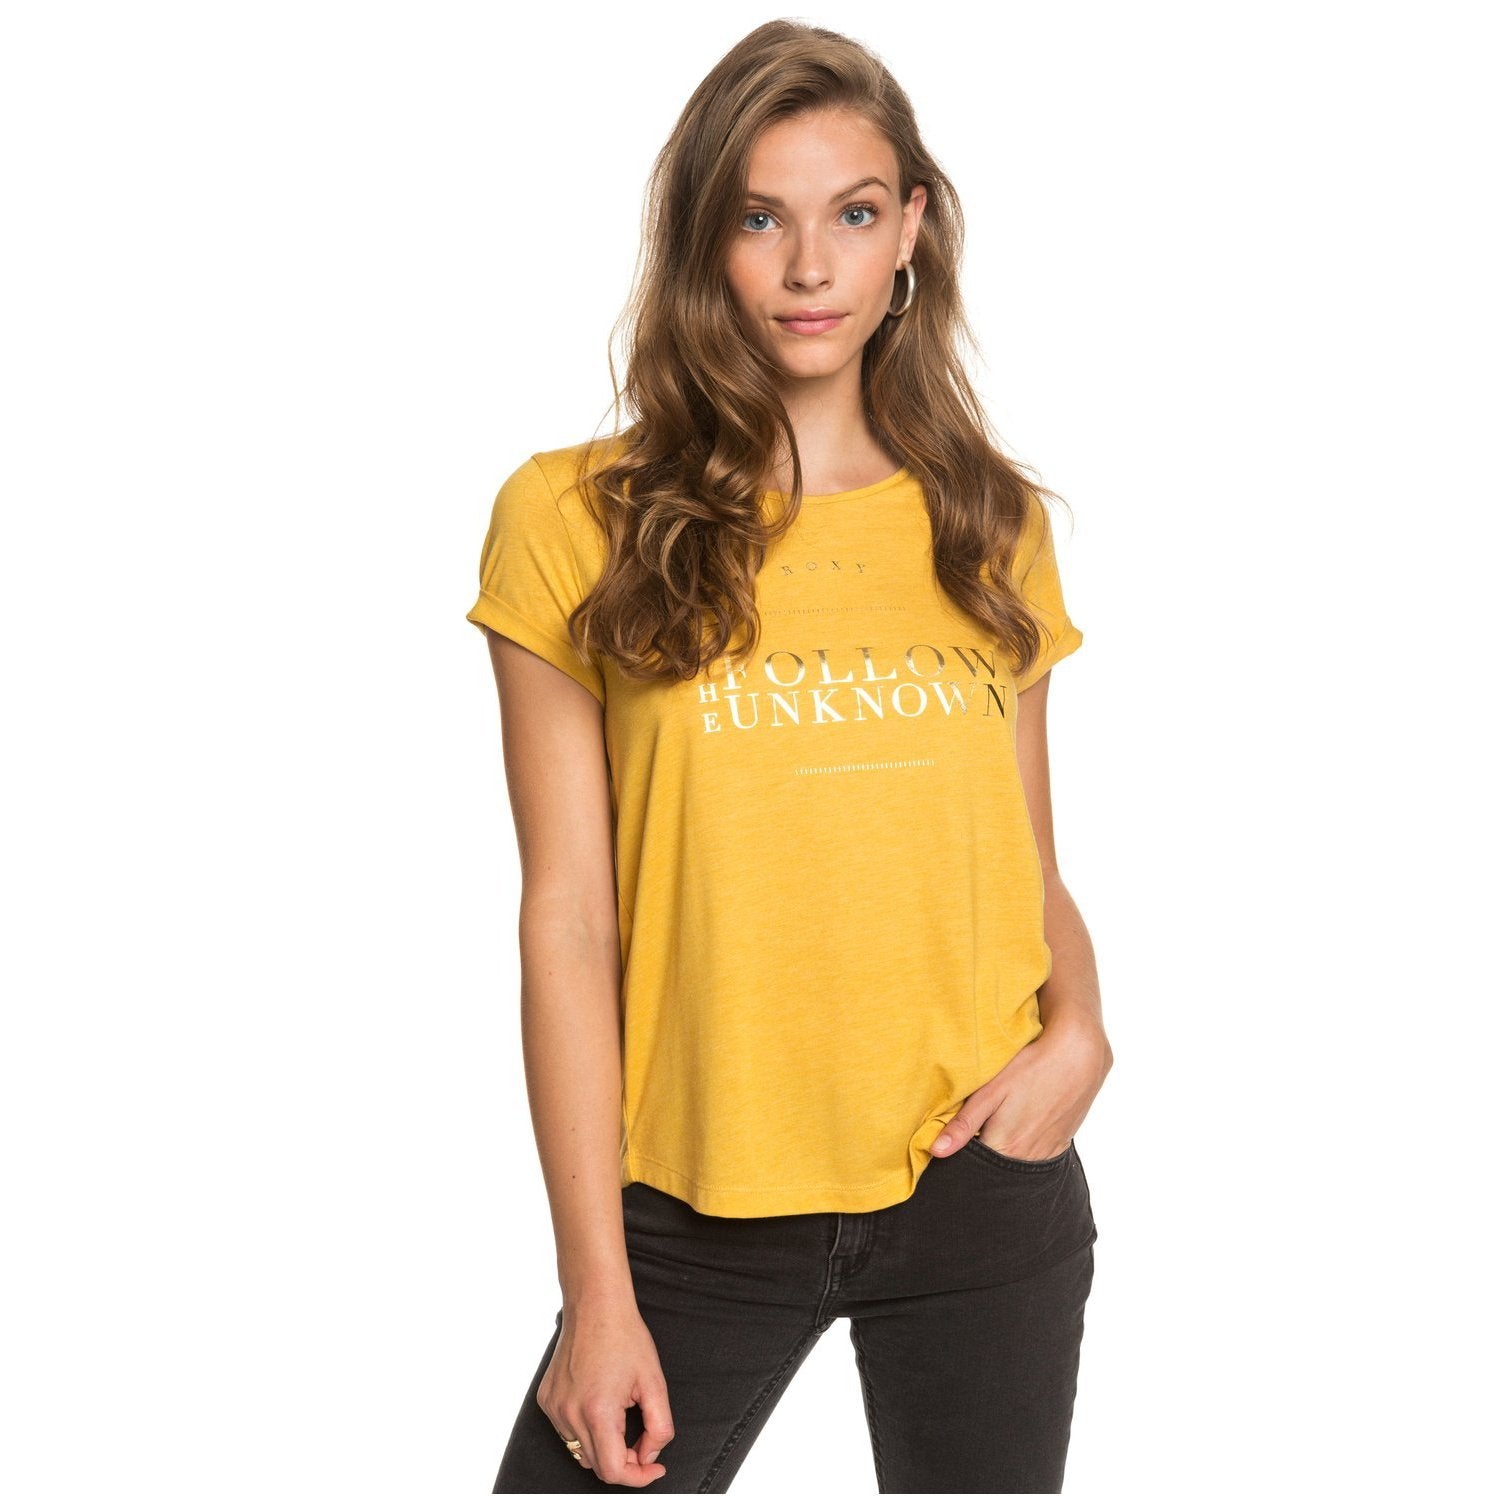 Call It Dreaming - T-Shirt for Women - Sporty Pro